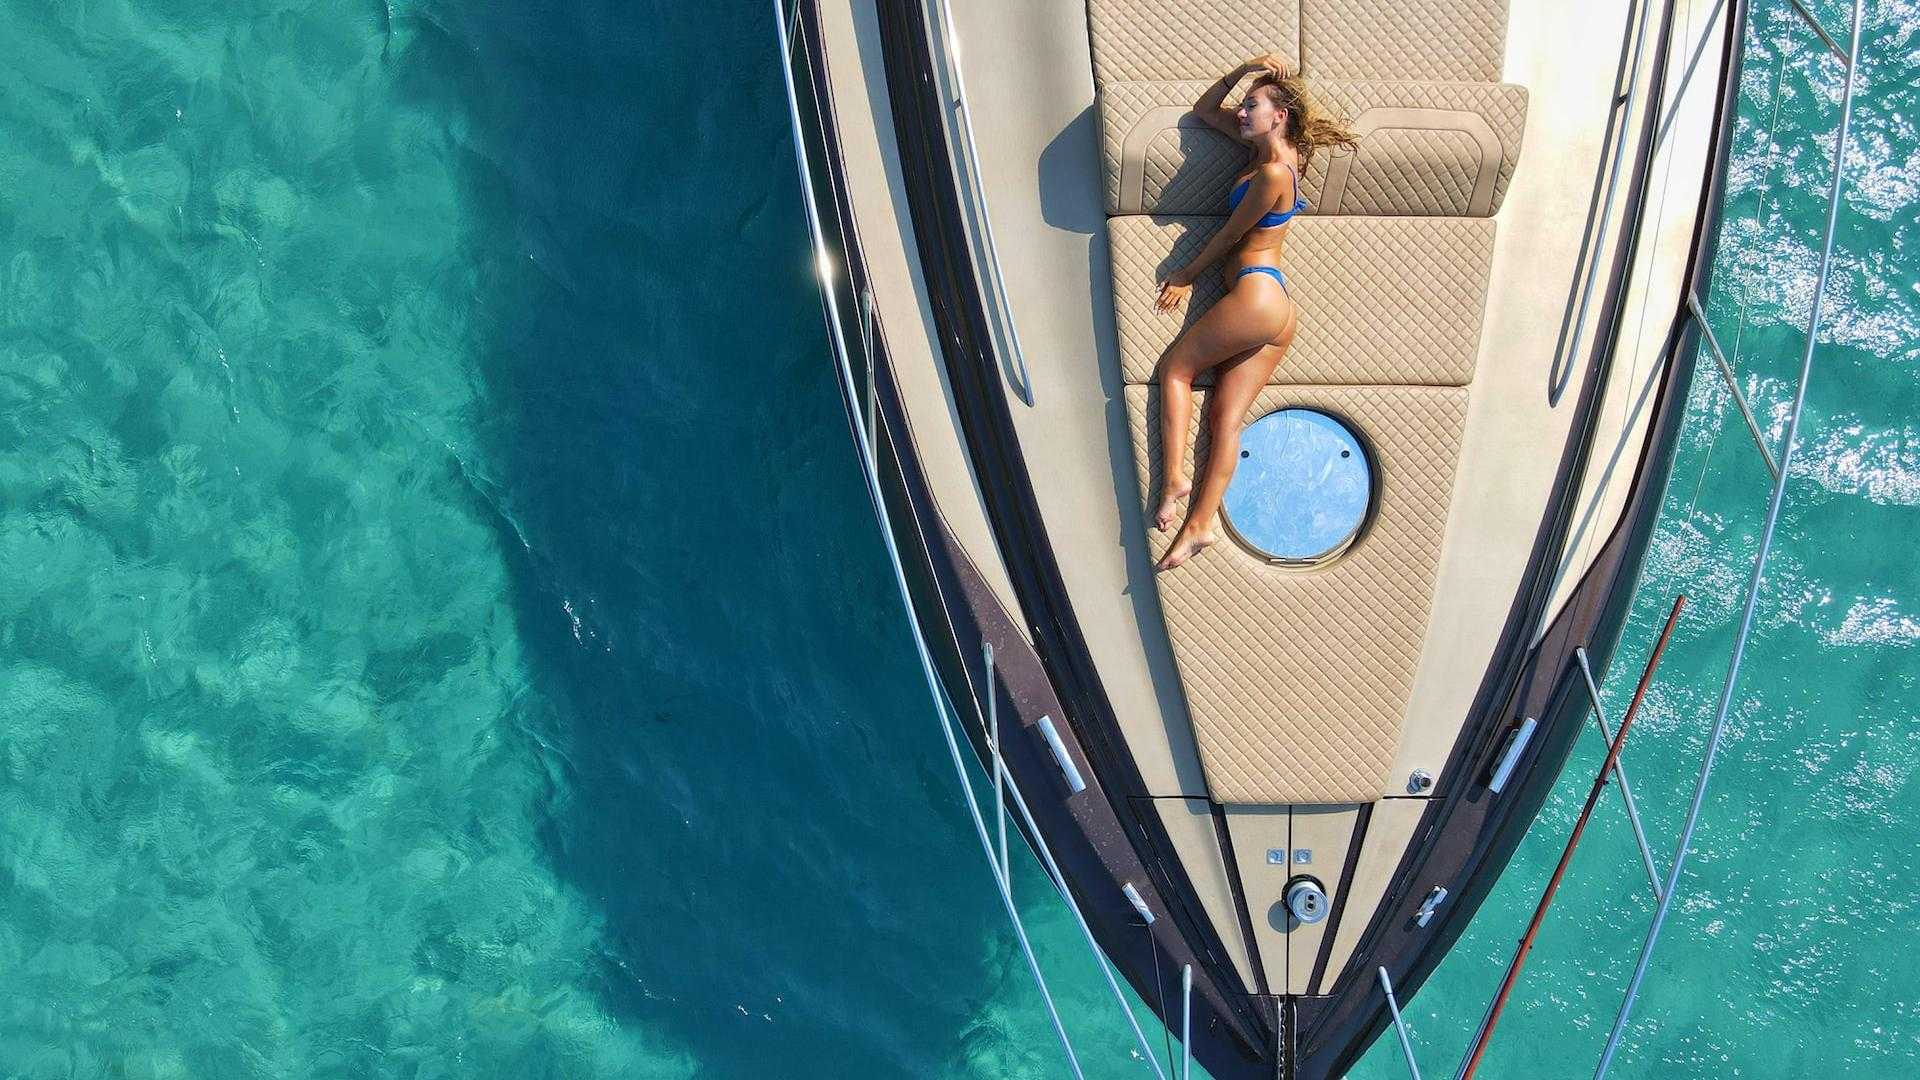 5 waves yacht